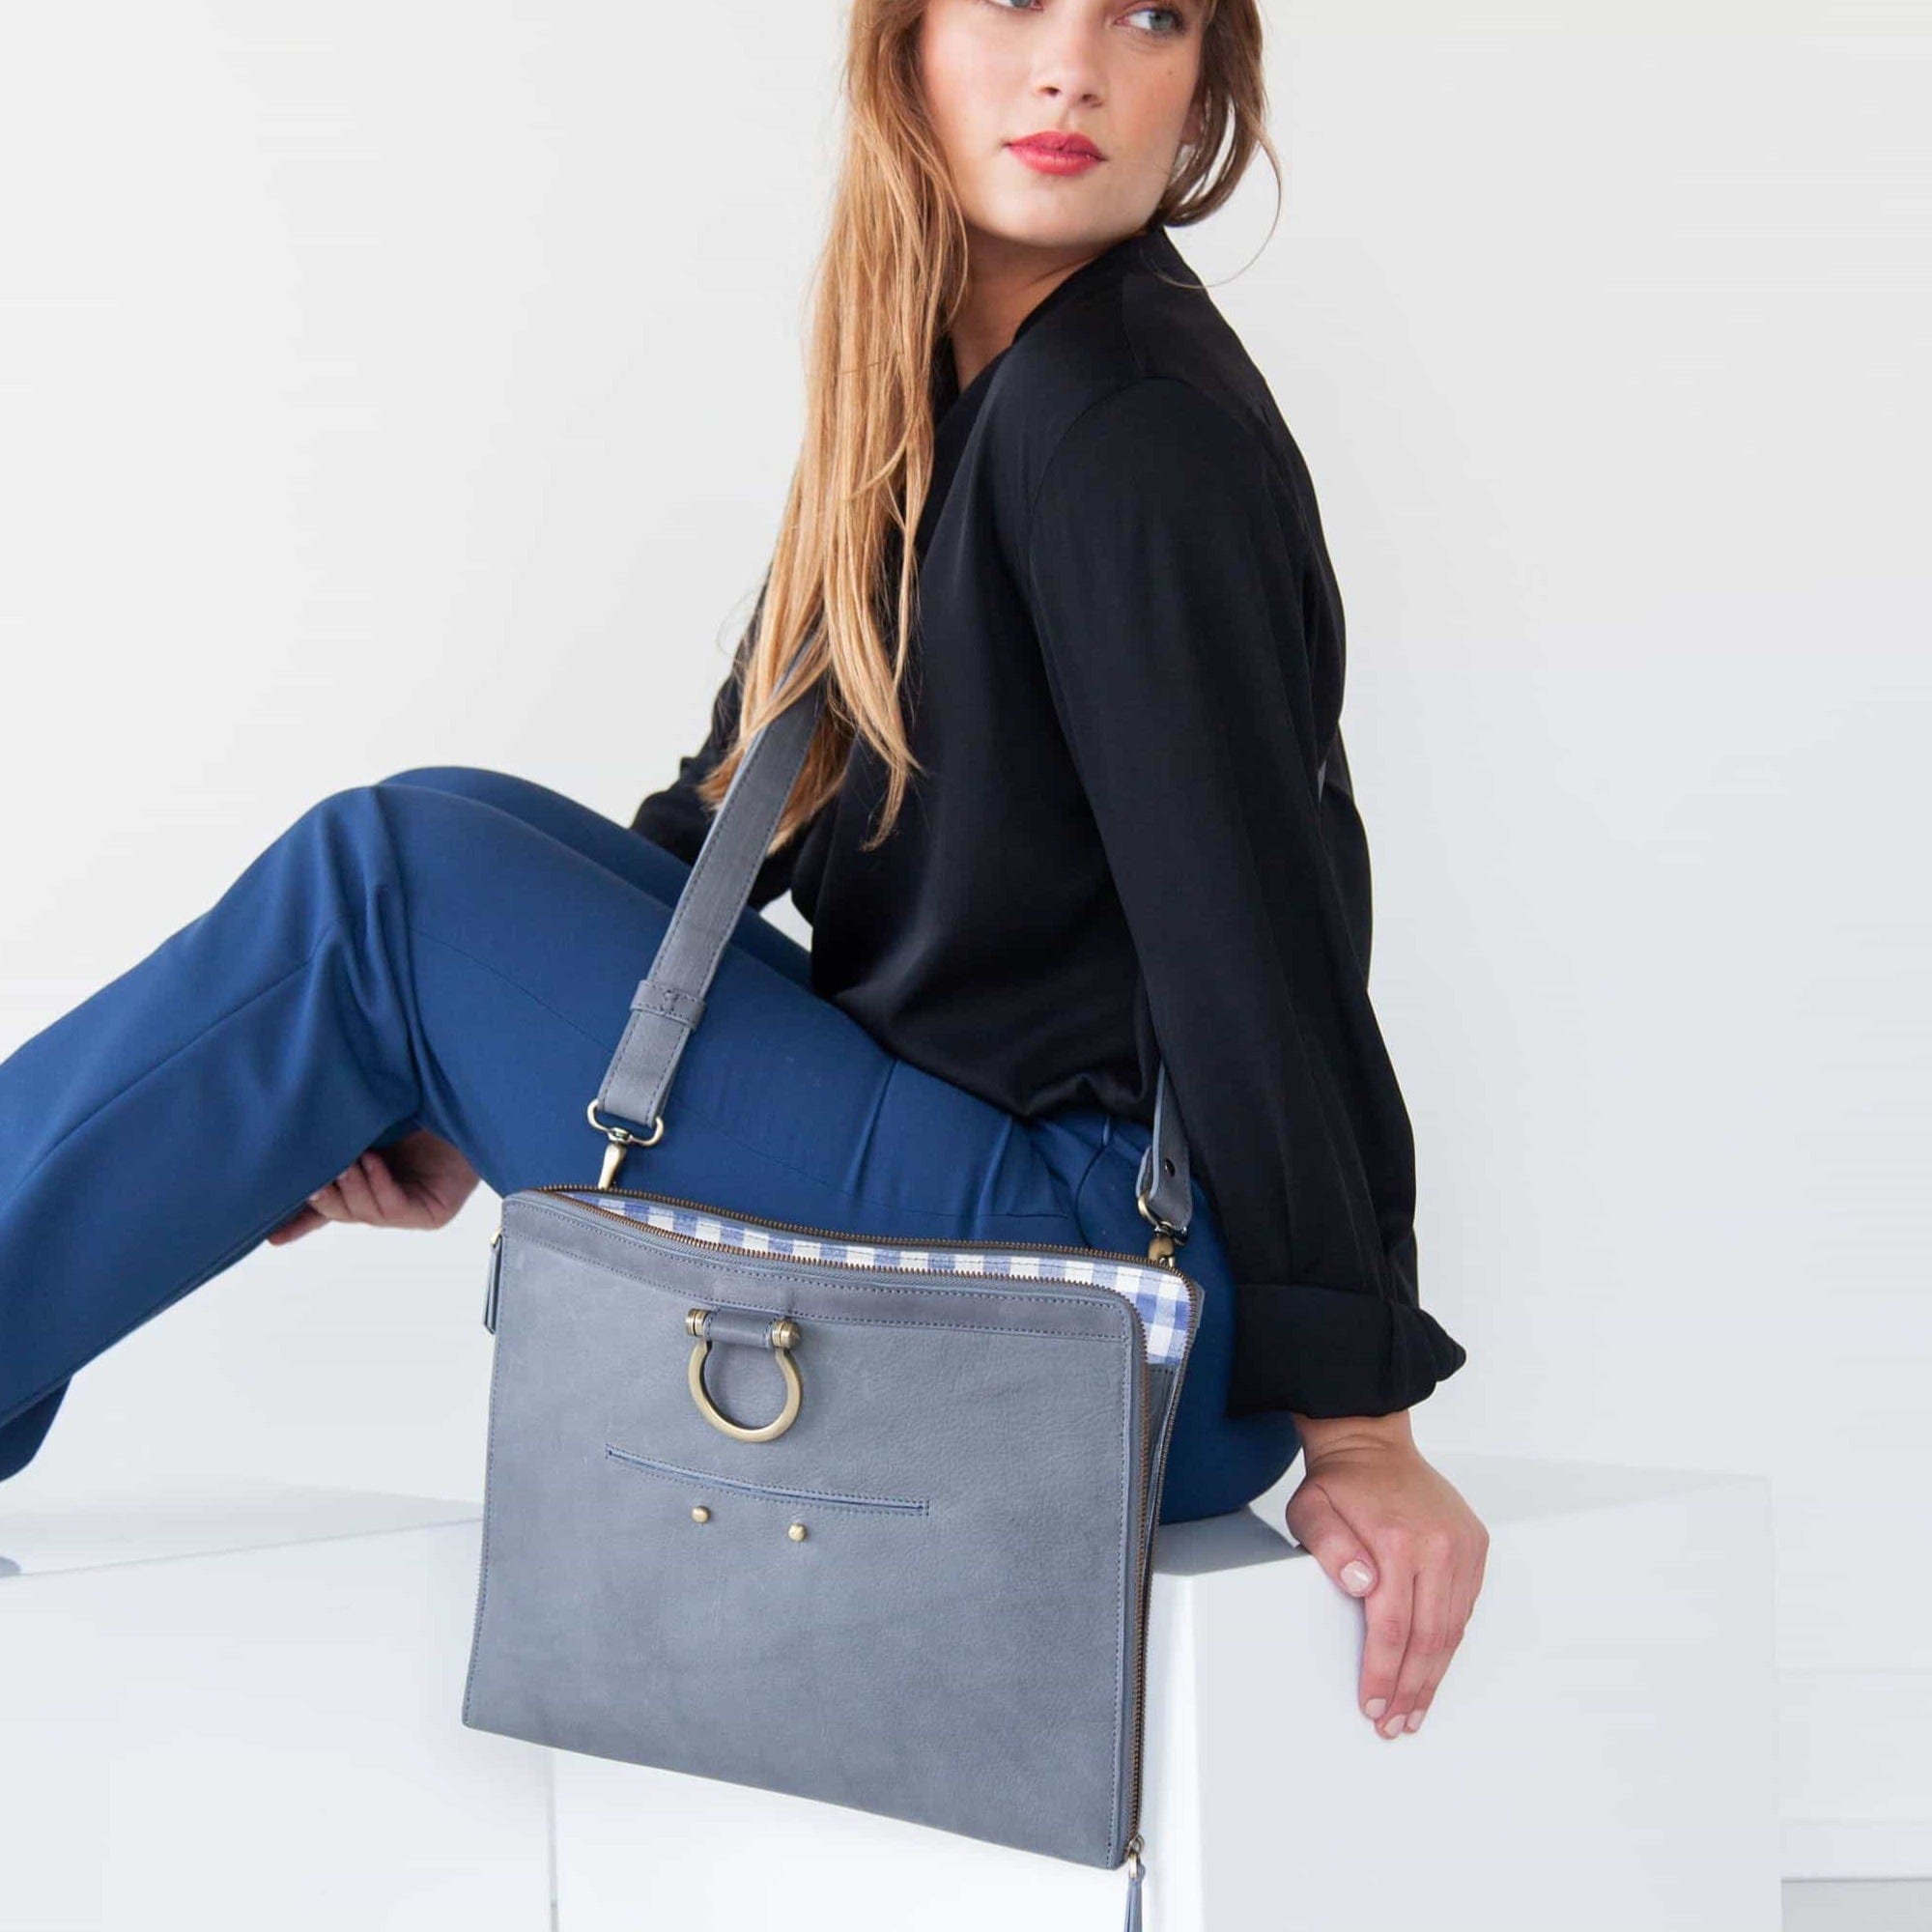 The M XL crossbody bag in gray raw leather opens easily with a 3-sided zipper.